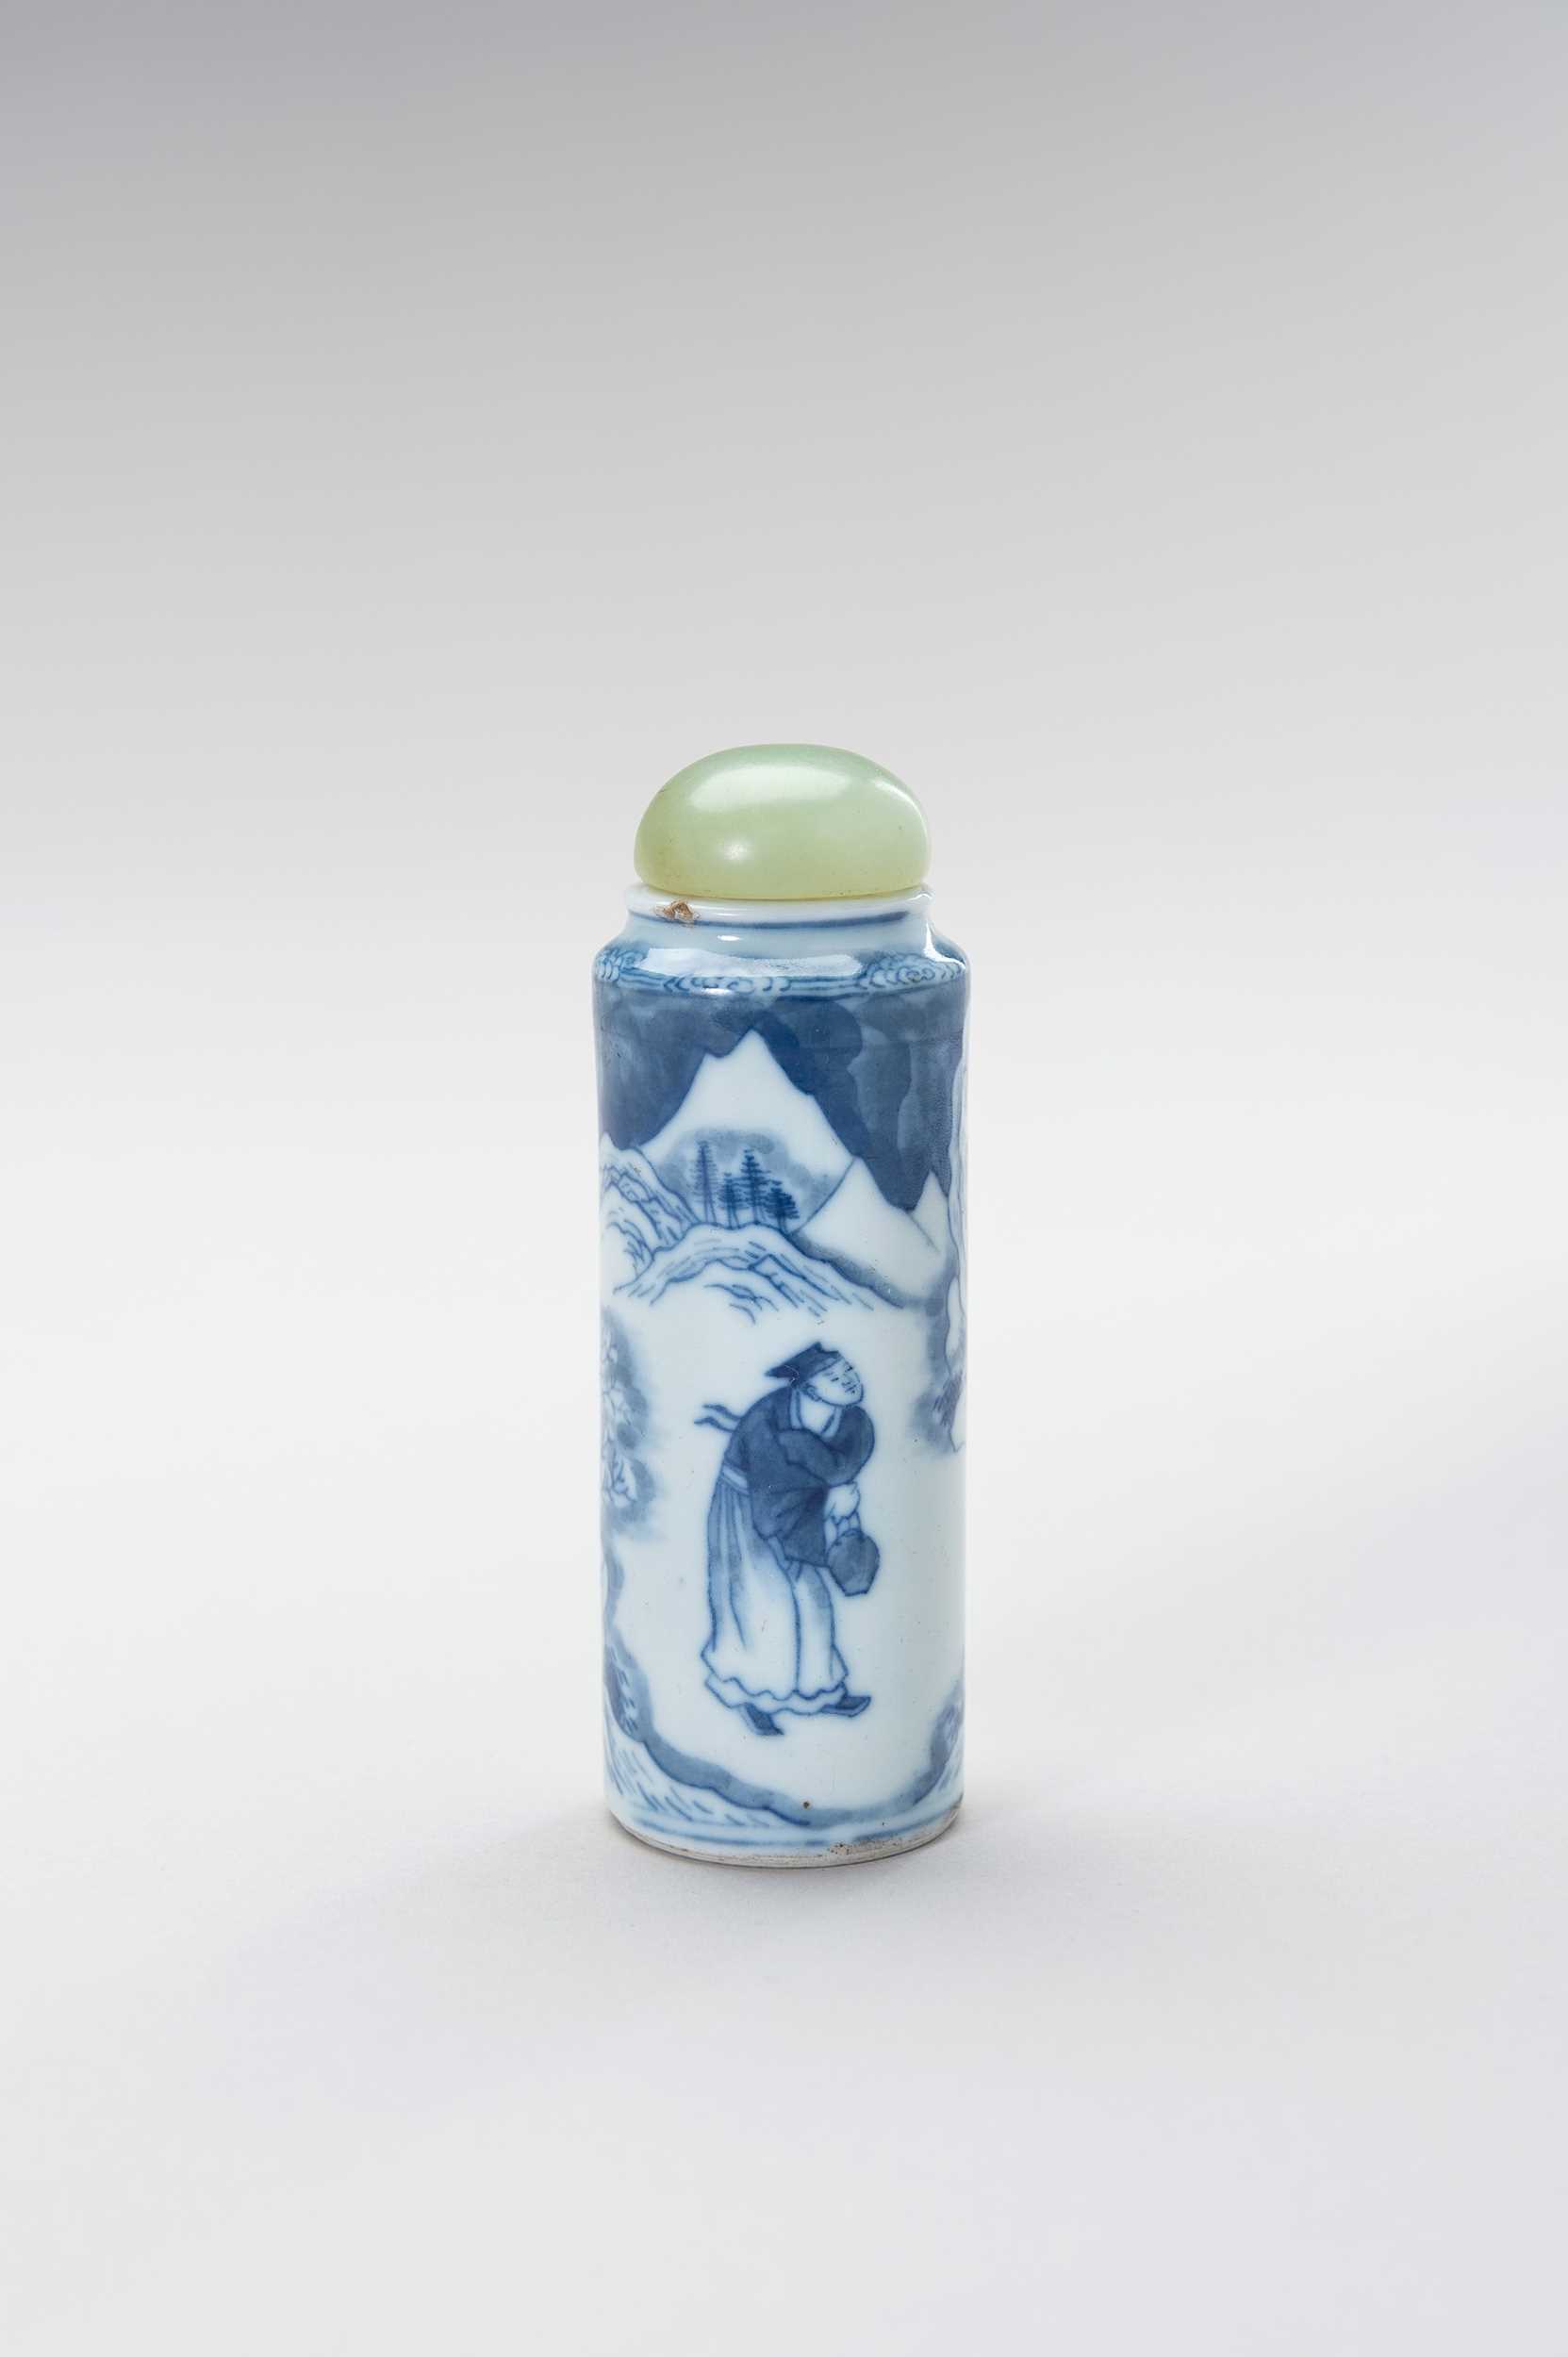 Lot 332 - A BLUE AND WHITE PORCELAIN SNUFF BOTTLE